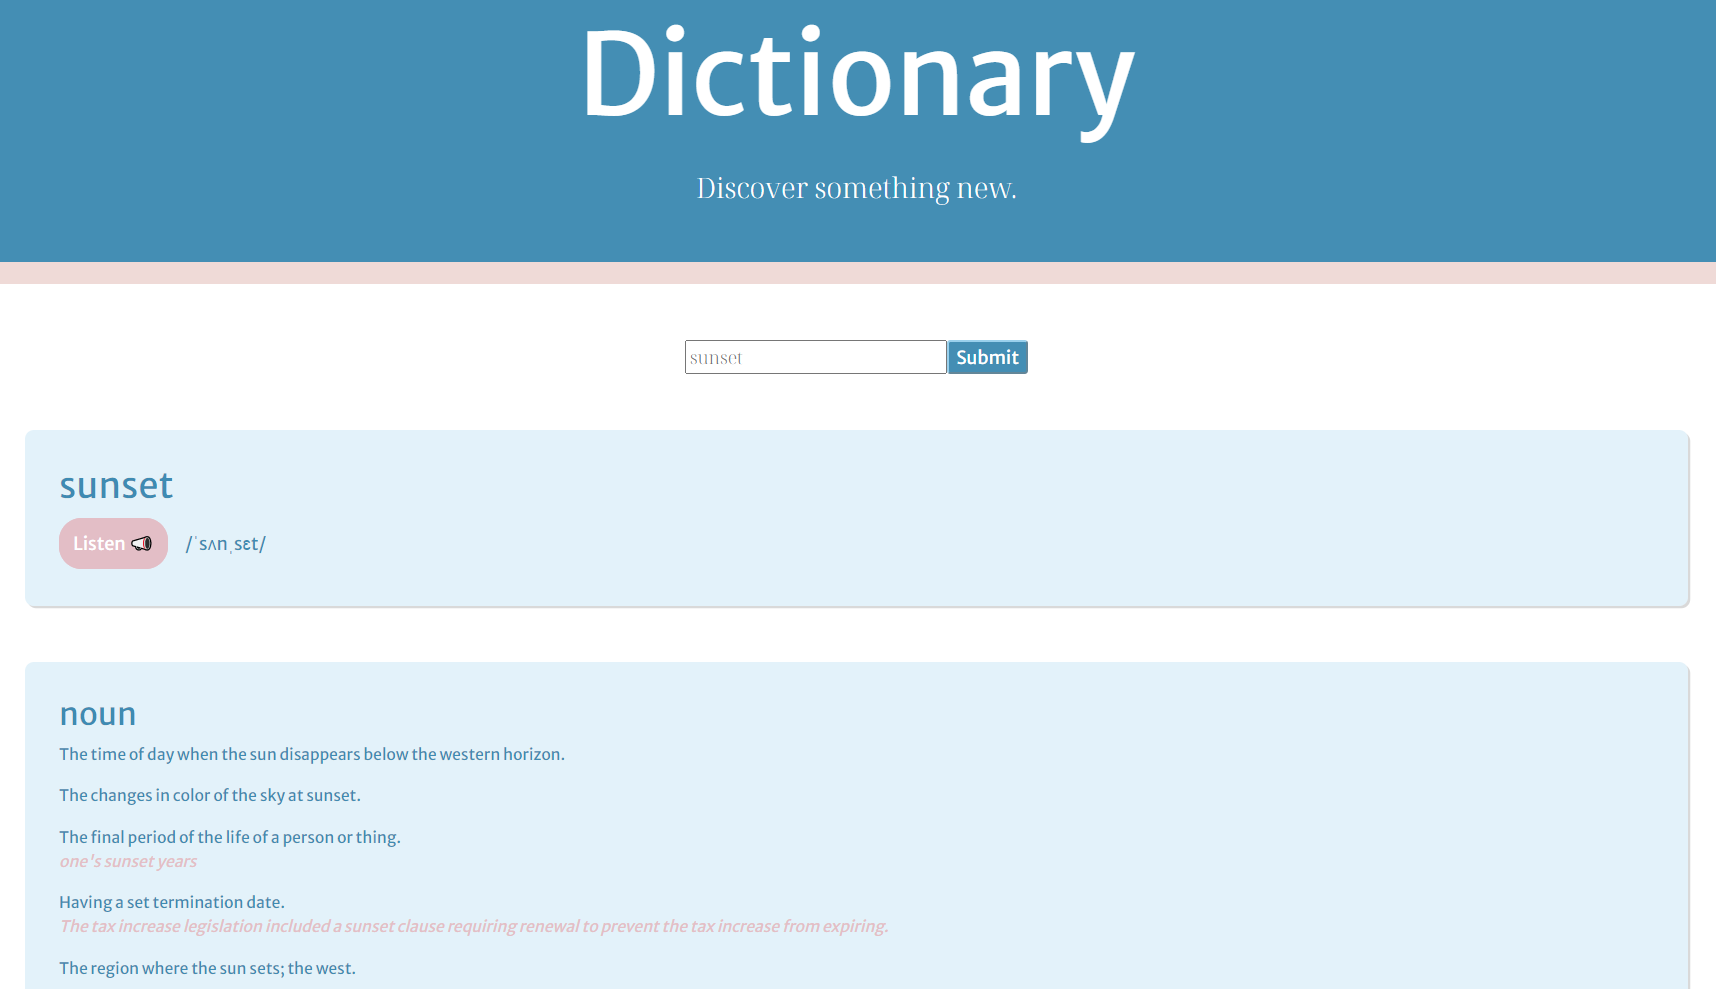 Dictionary Project Image